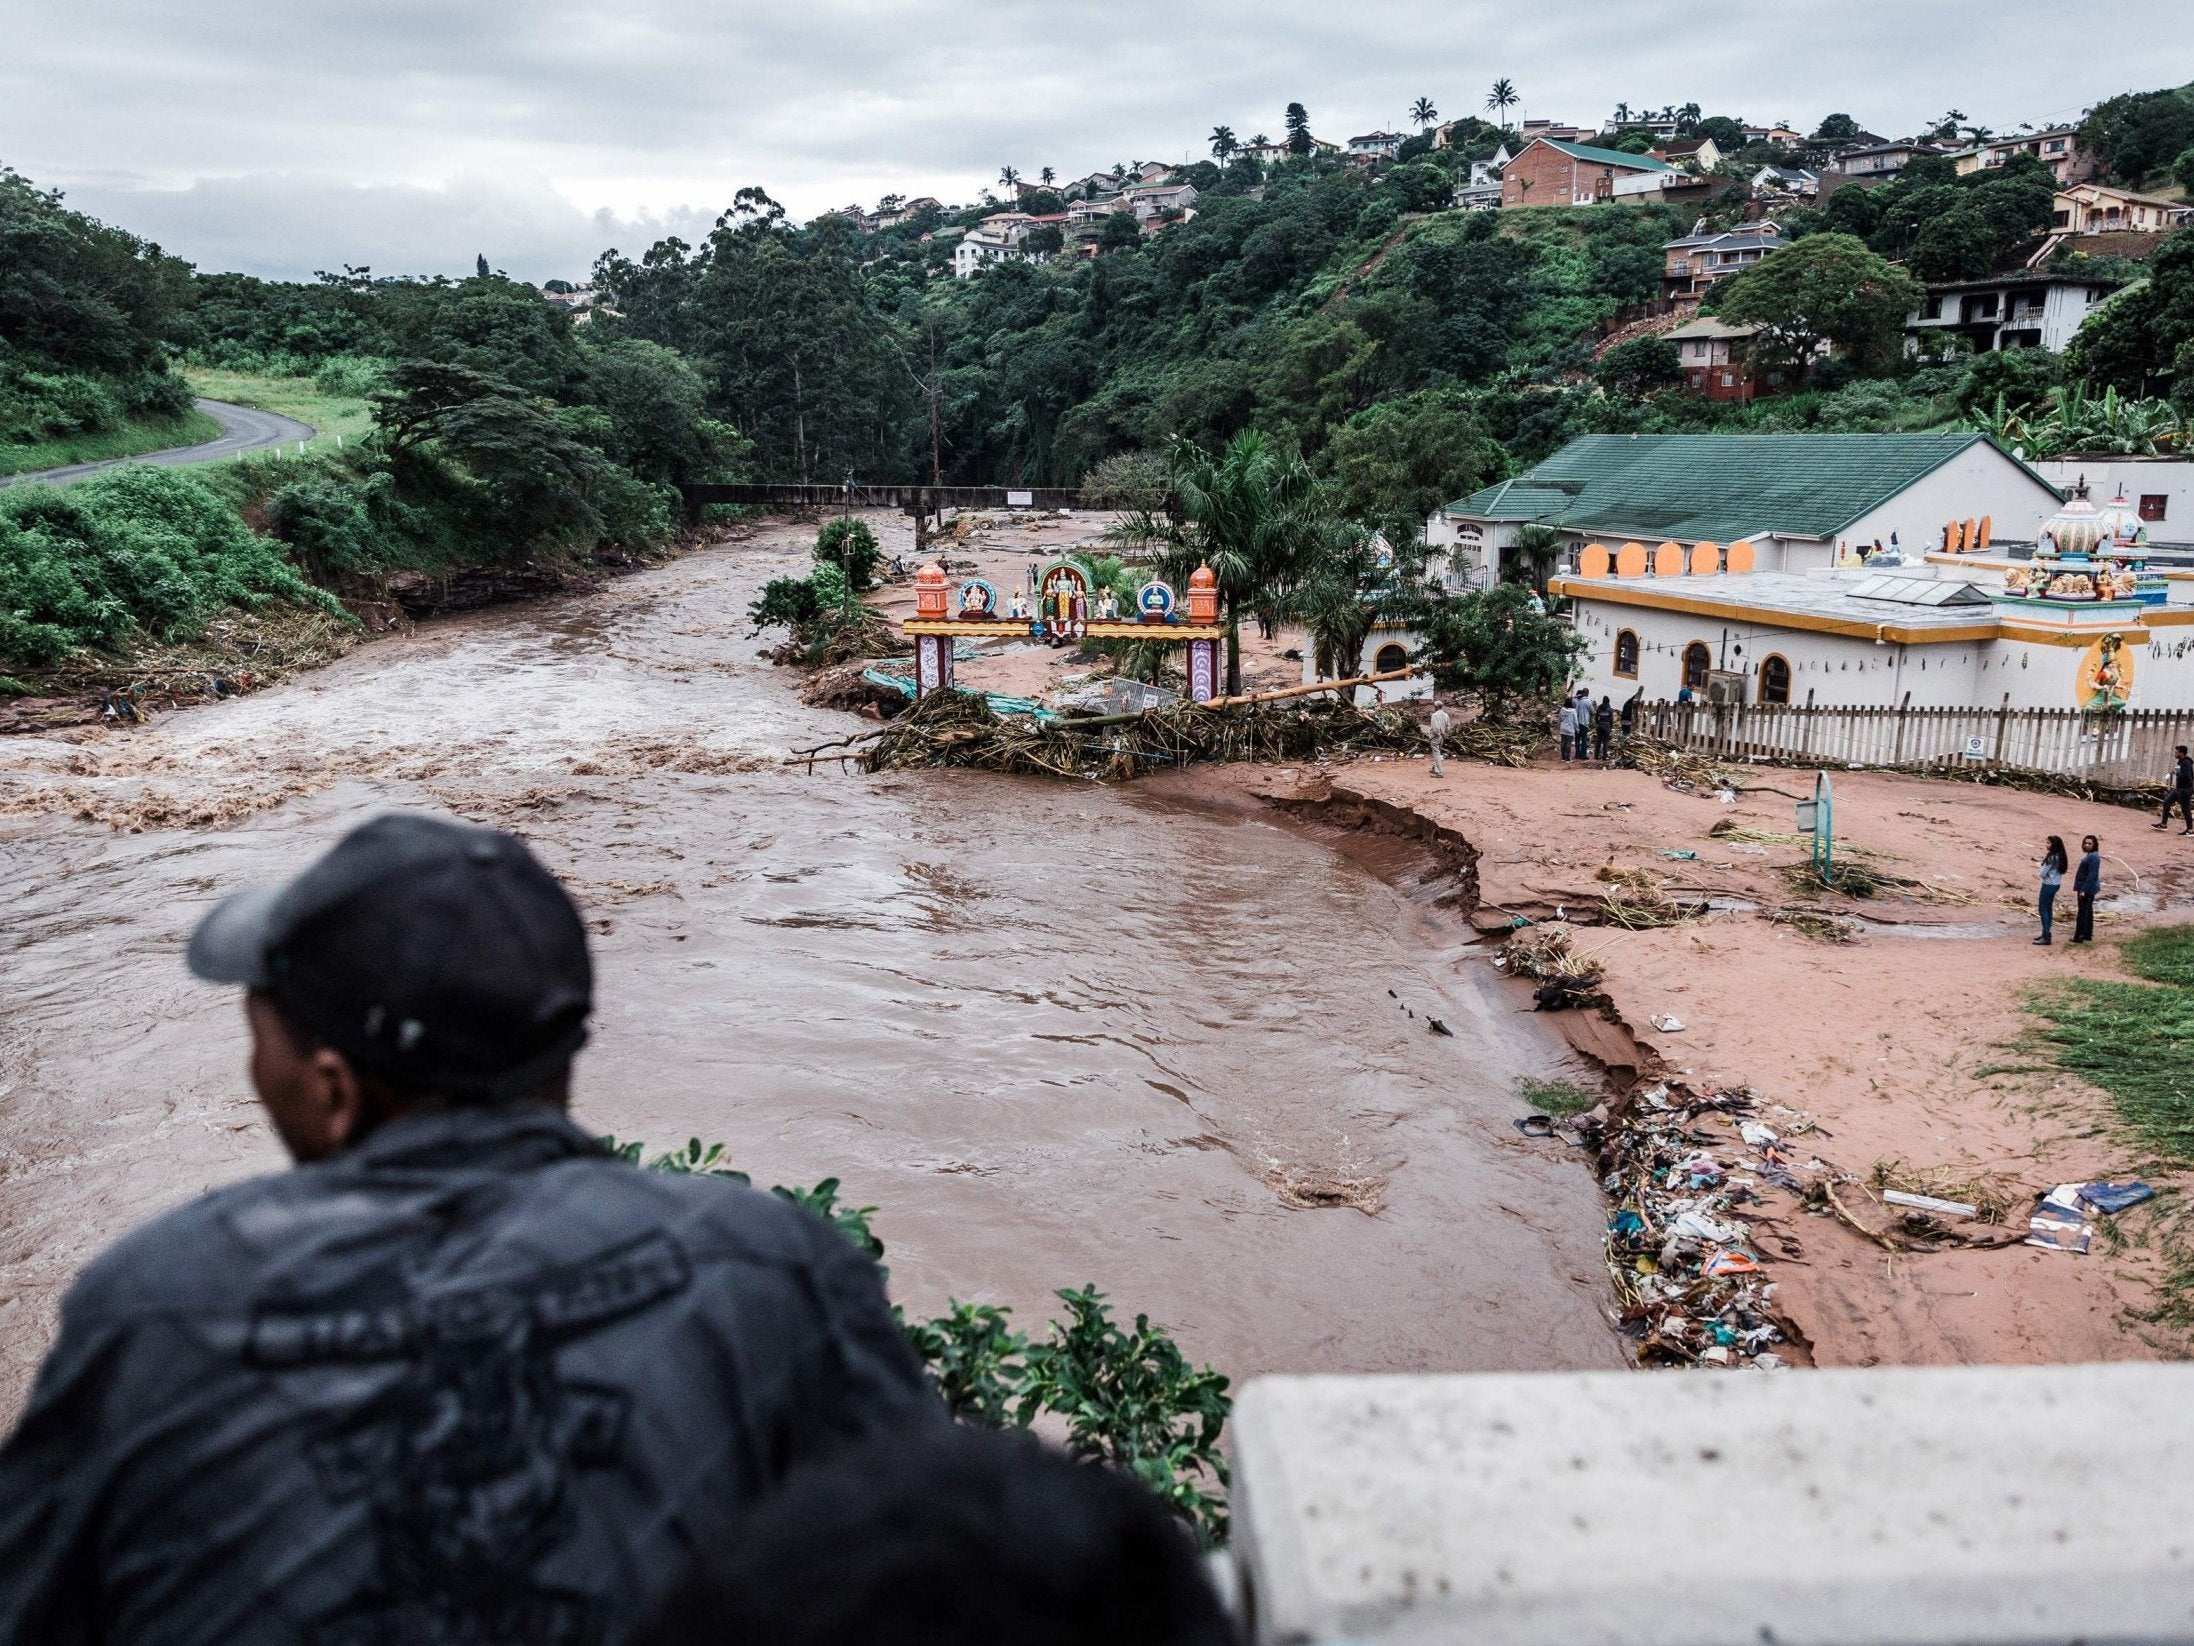 The Umhlatuzana Hindu Temple, south of Durban, in the province of KwaZulu-Natal, in South Africa, damaged after heavy rain and flash floods following torrential downpour on 23 April 2019.